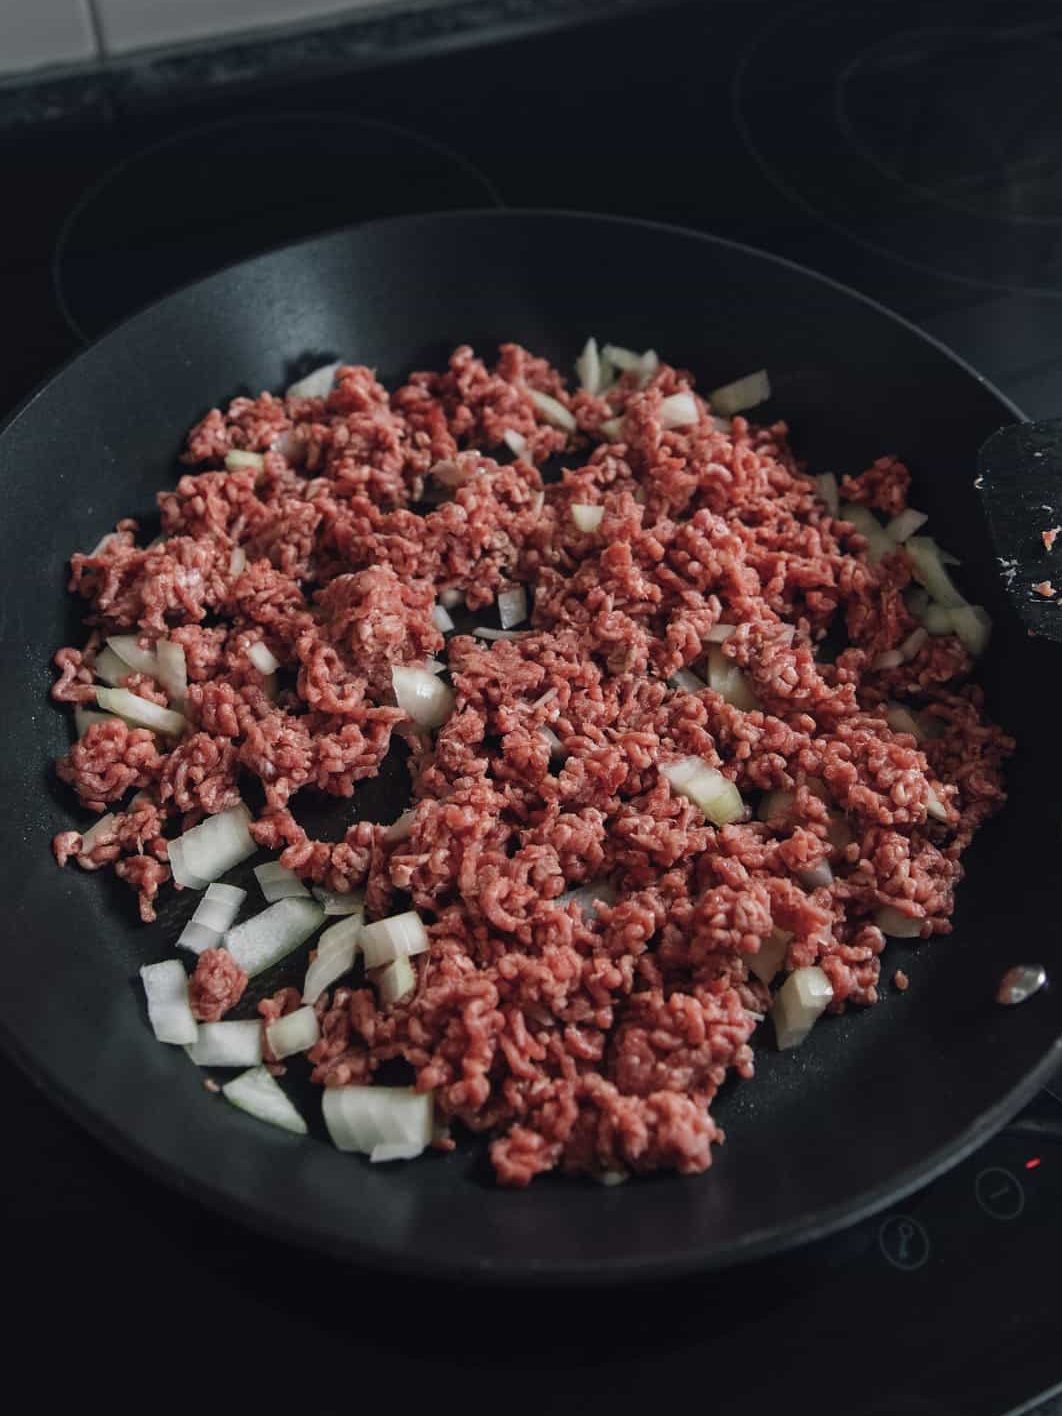 In a large skillet over medium heat, add the ground beef and diced onion. Brown meat until thoroughly cooked. Drain off excess fat and return to skillet.